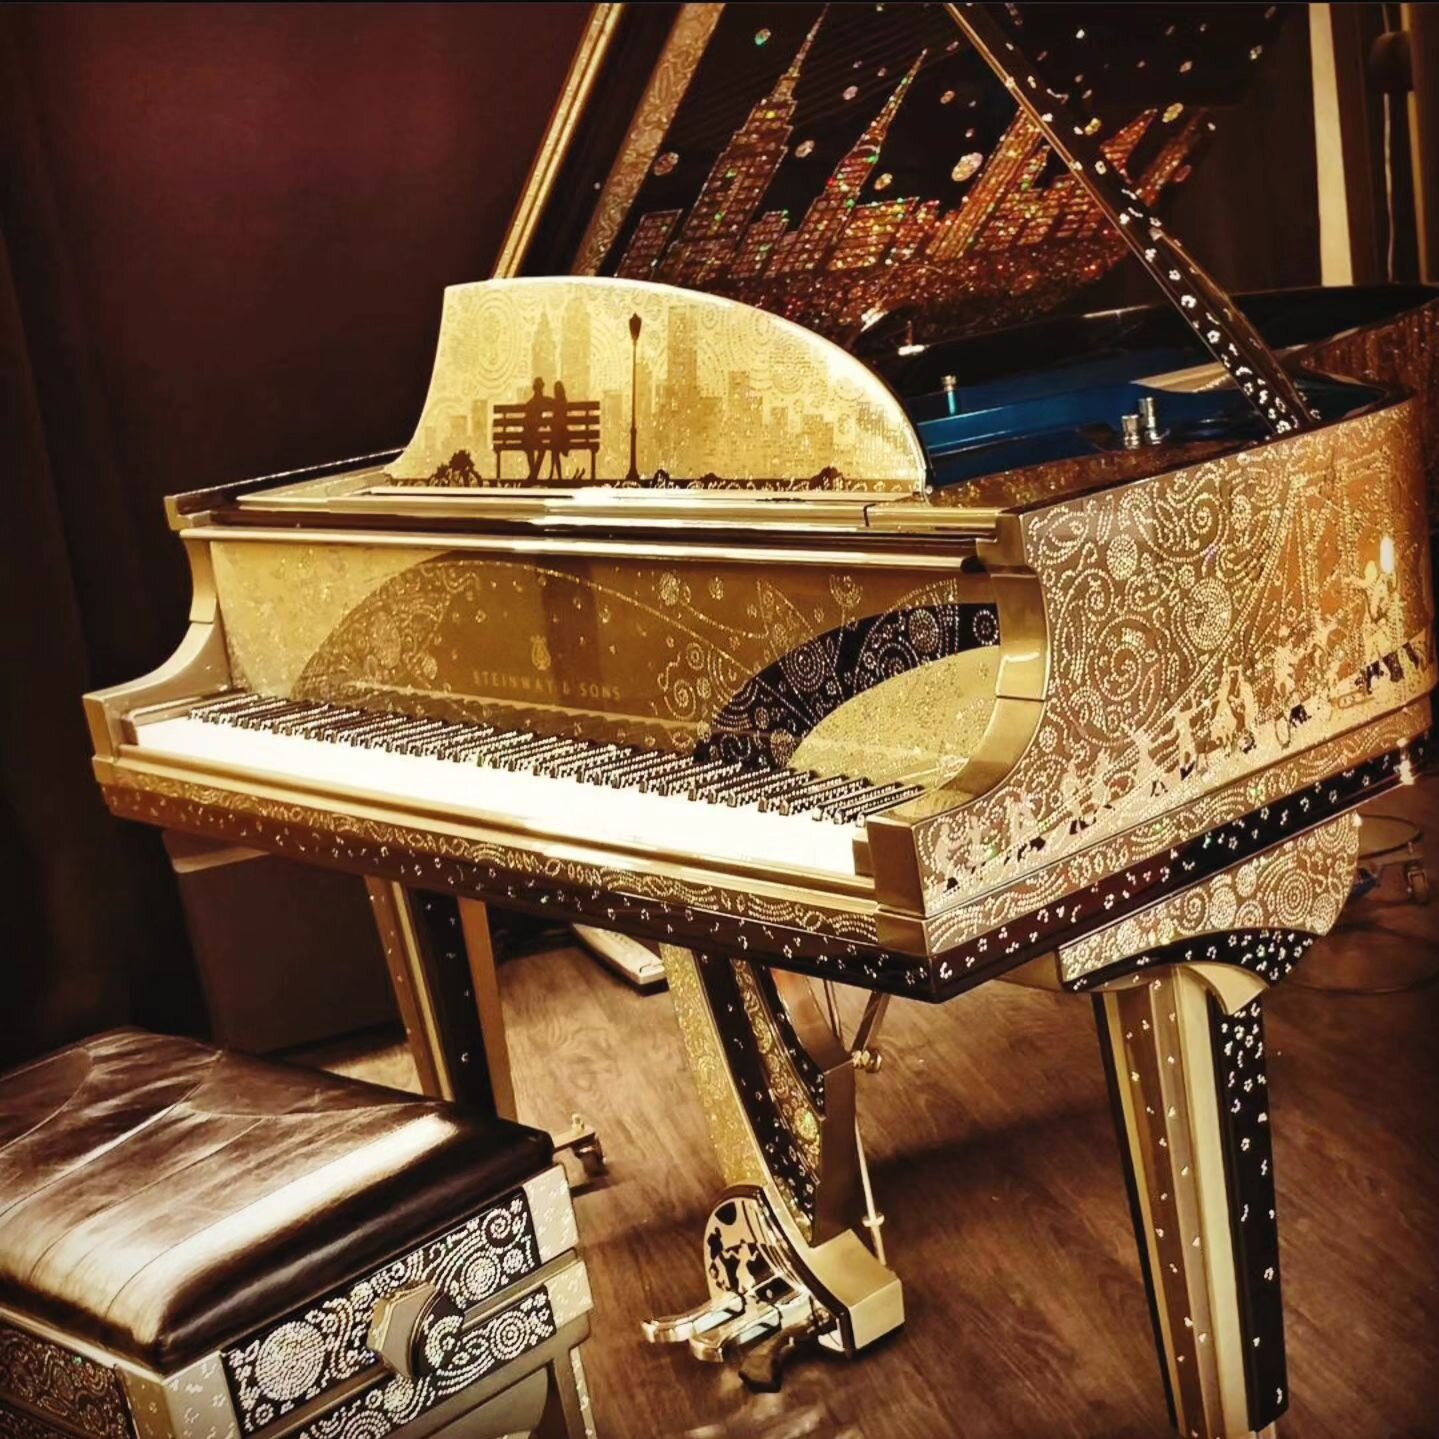 This breathtaking @steinwayandsons is now available for purchase. A rare opportunity to own one of the most beautiful instruments ever created. Contact us today!